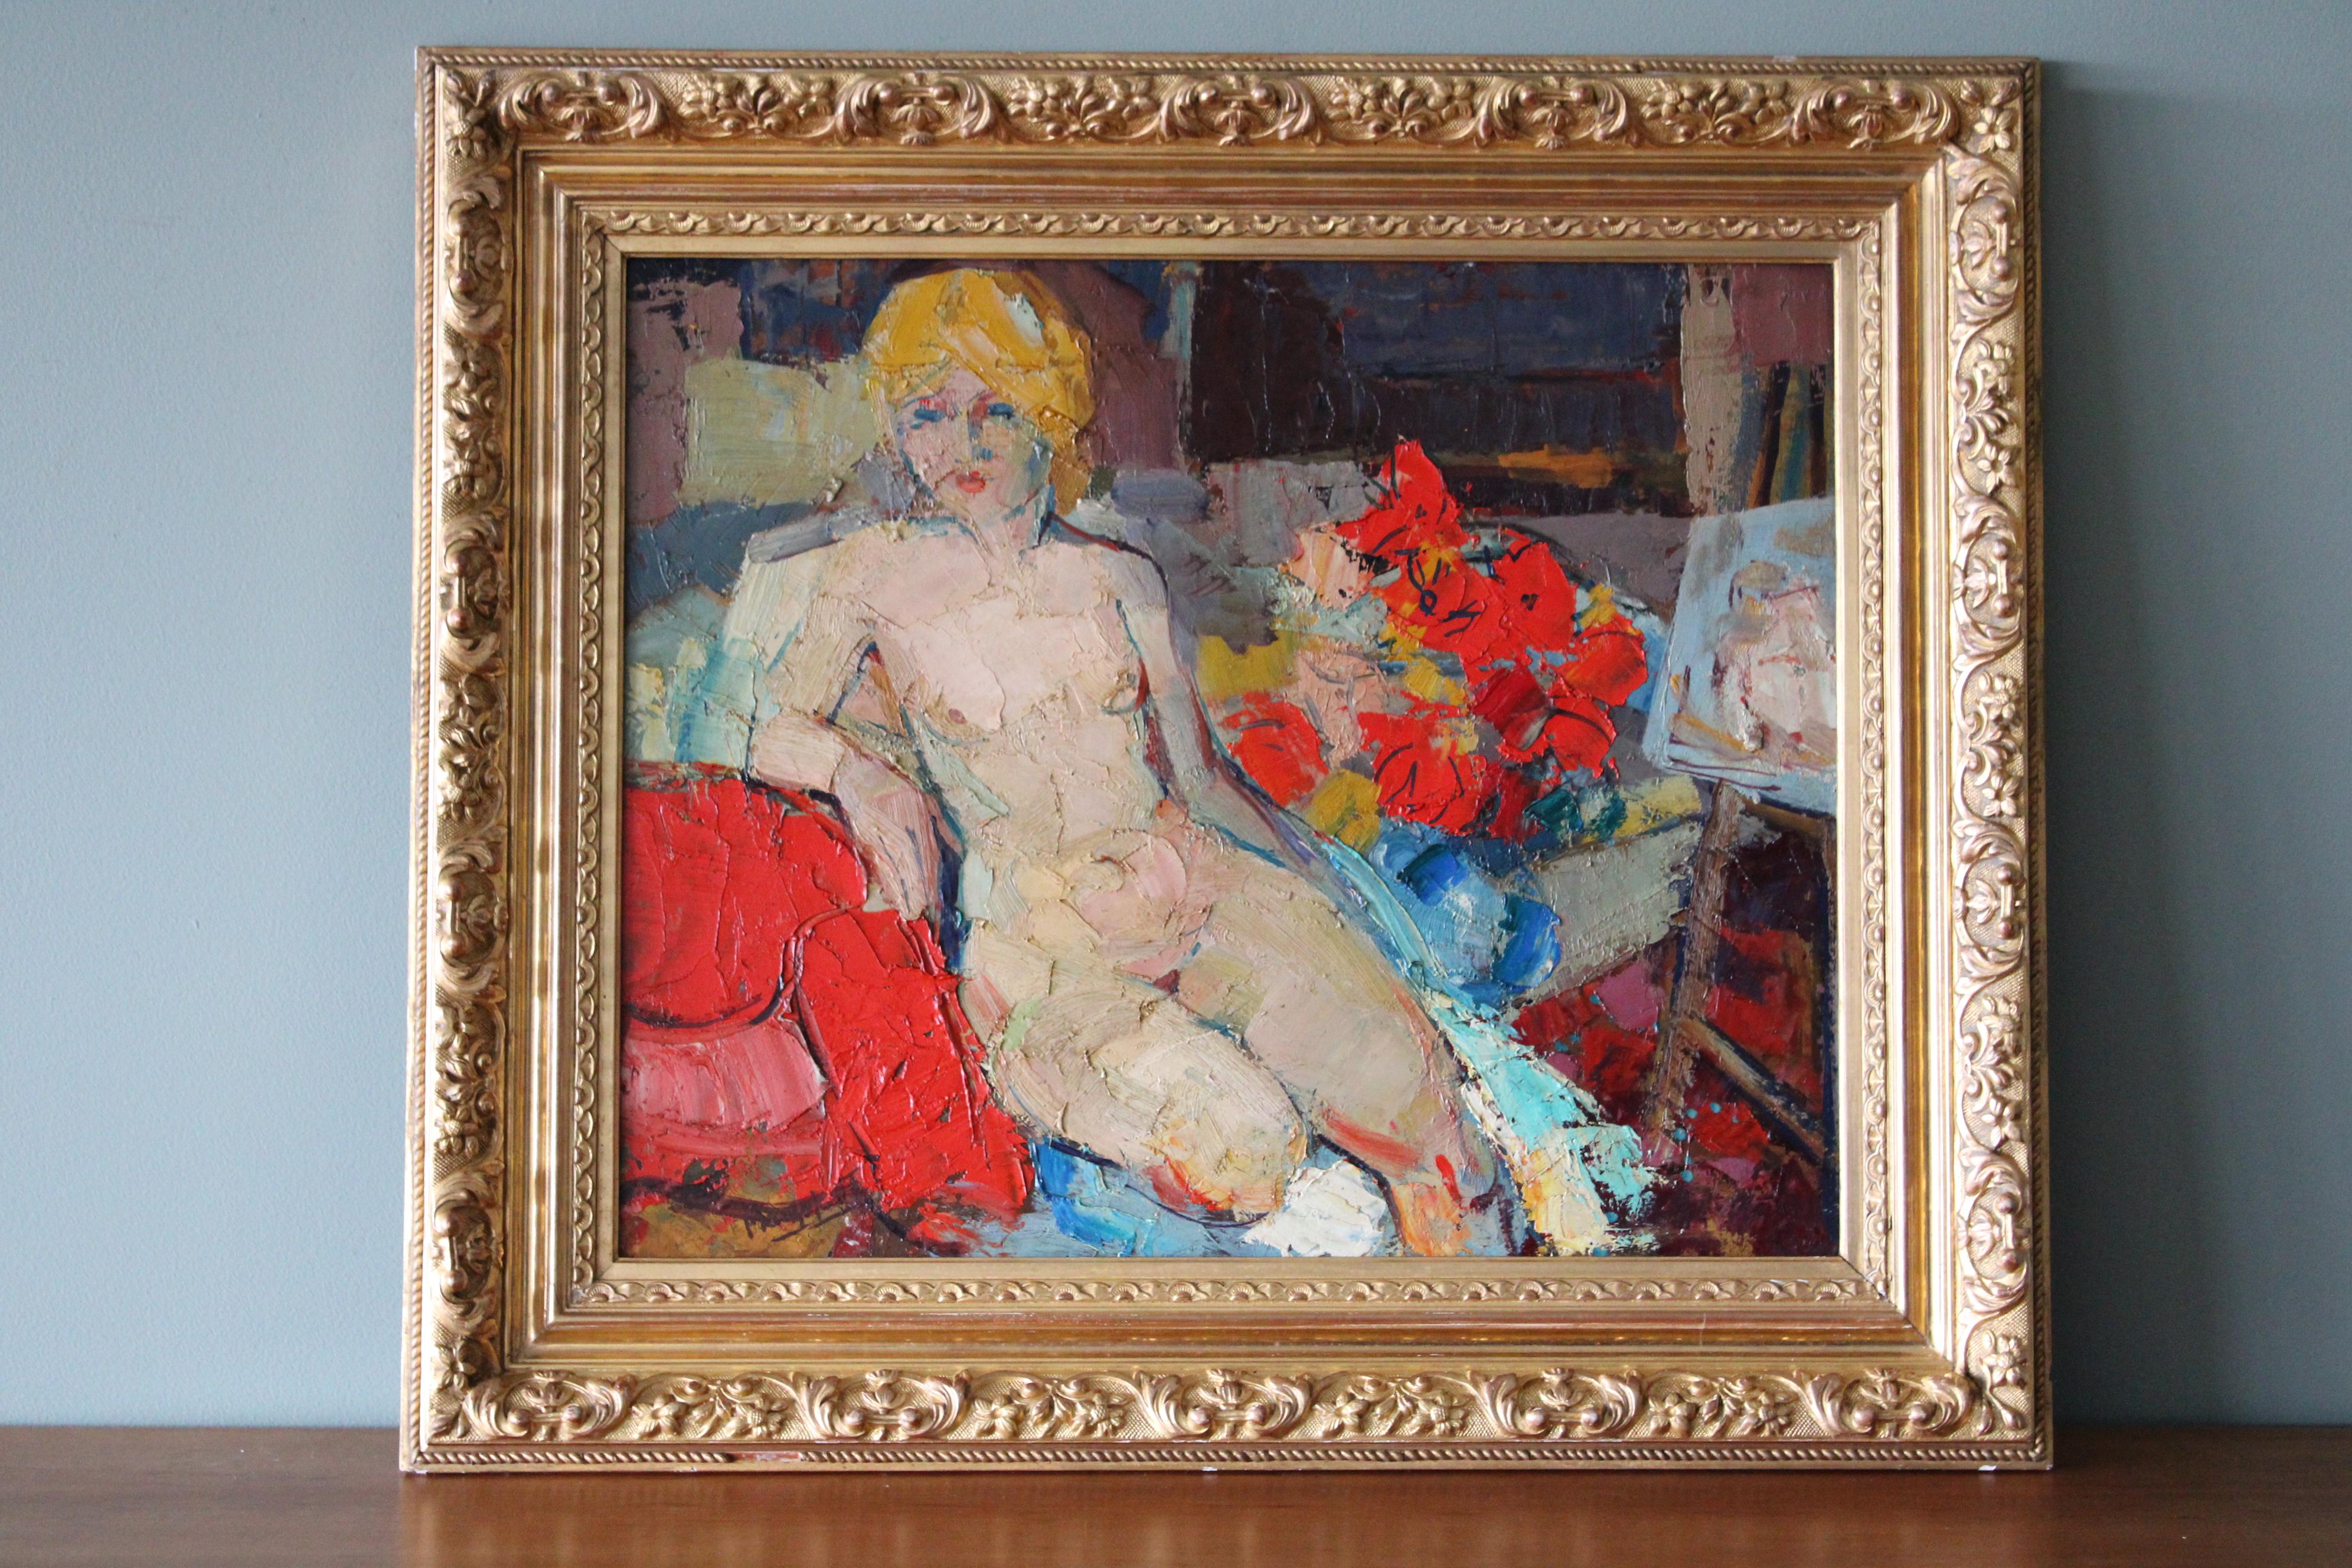 Nude Oil Painting, Figurative Nude Painting, Nude Portrait, woman oil painting - Brown Figurative Painting by Francois Mengalatte